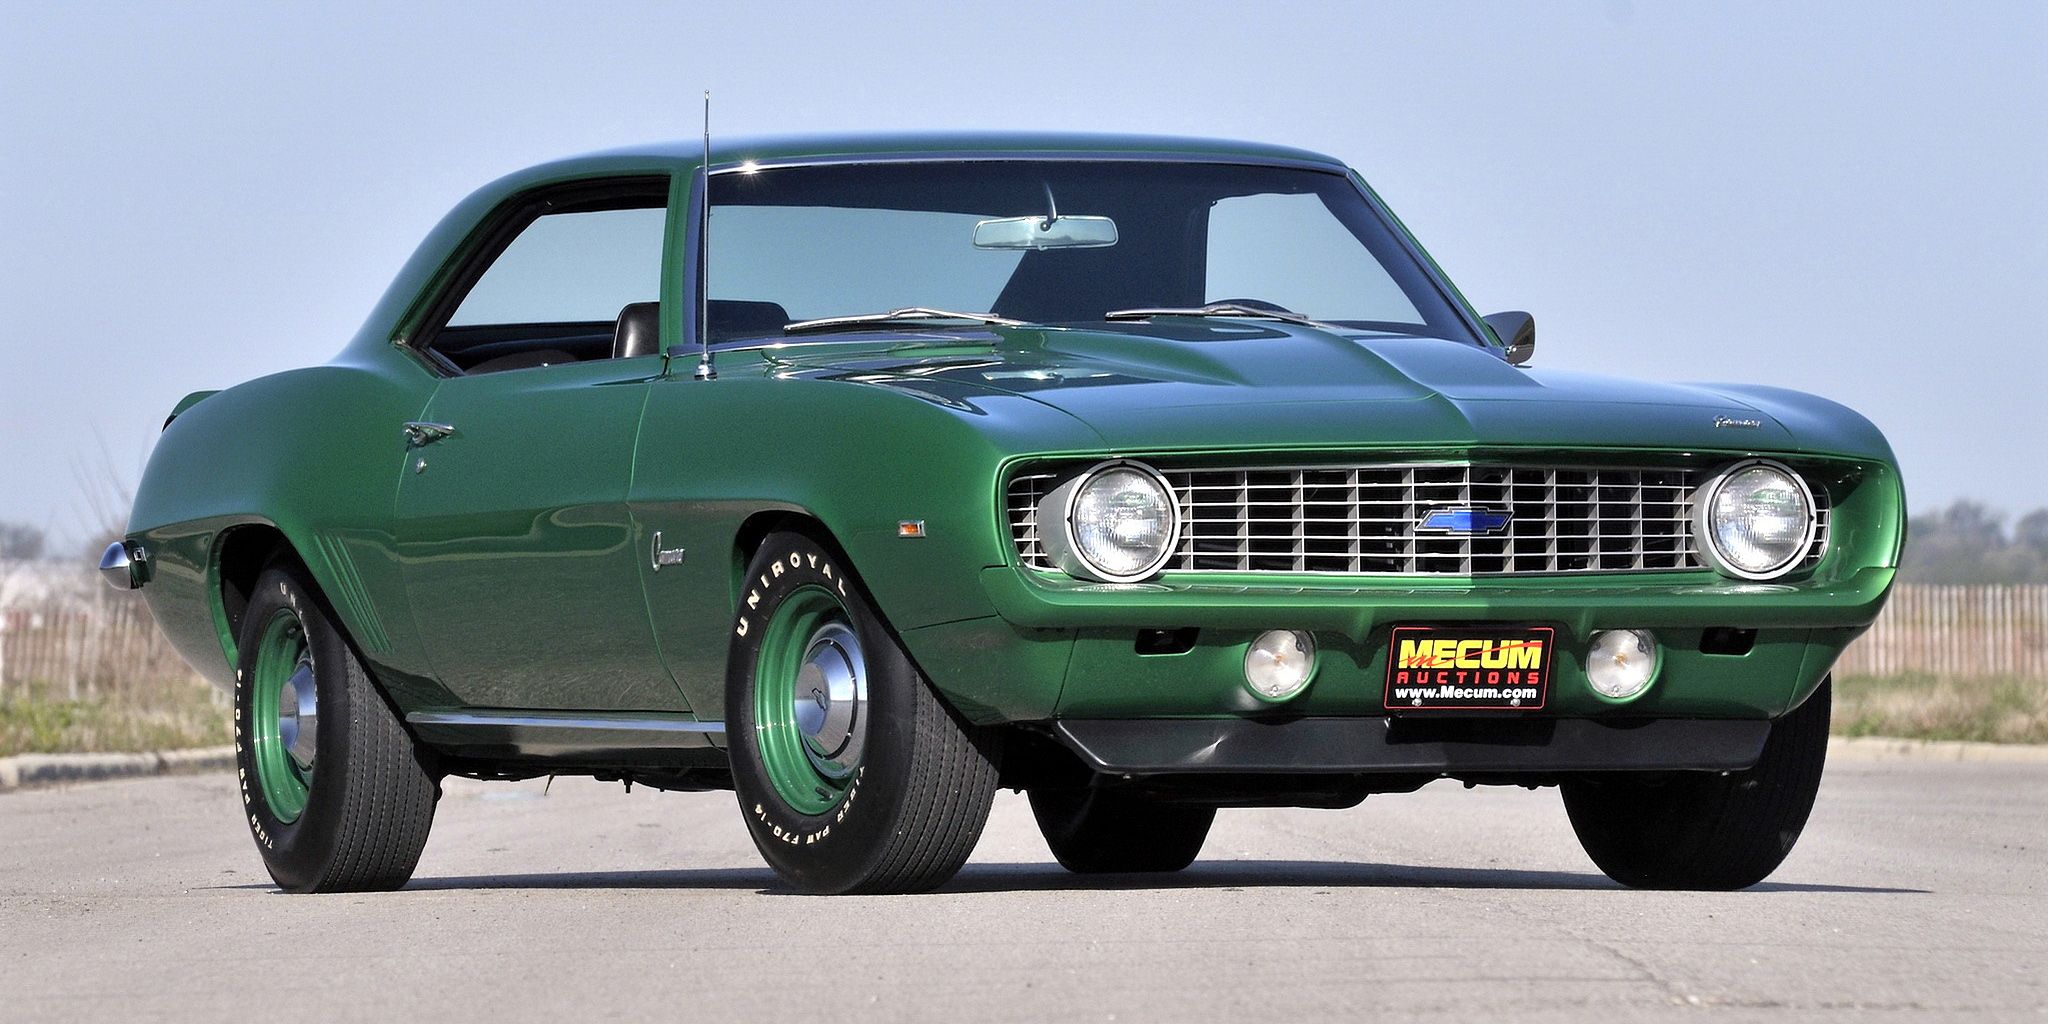 What is rarest muscle car?